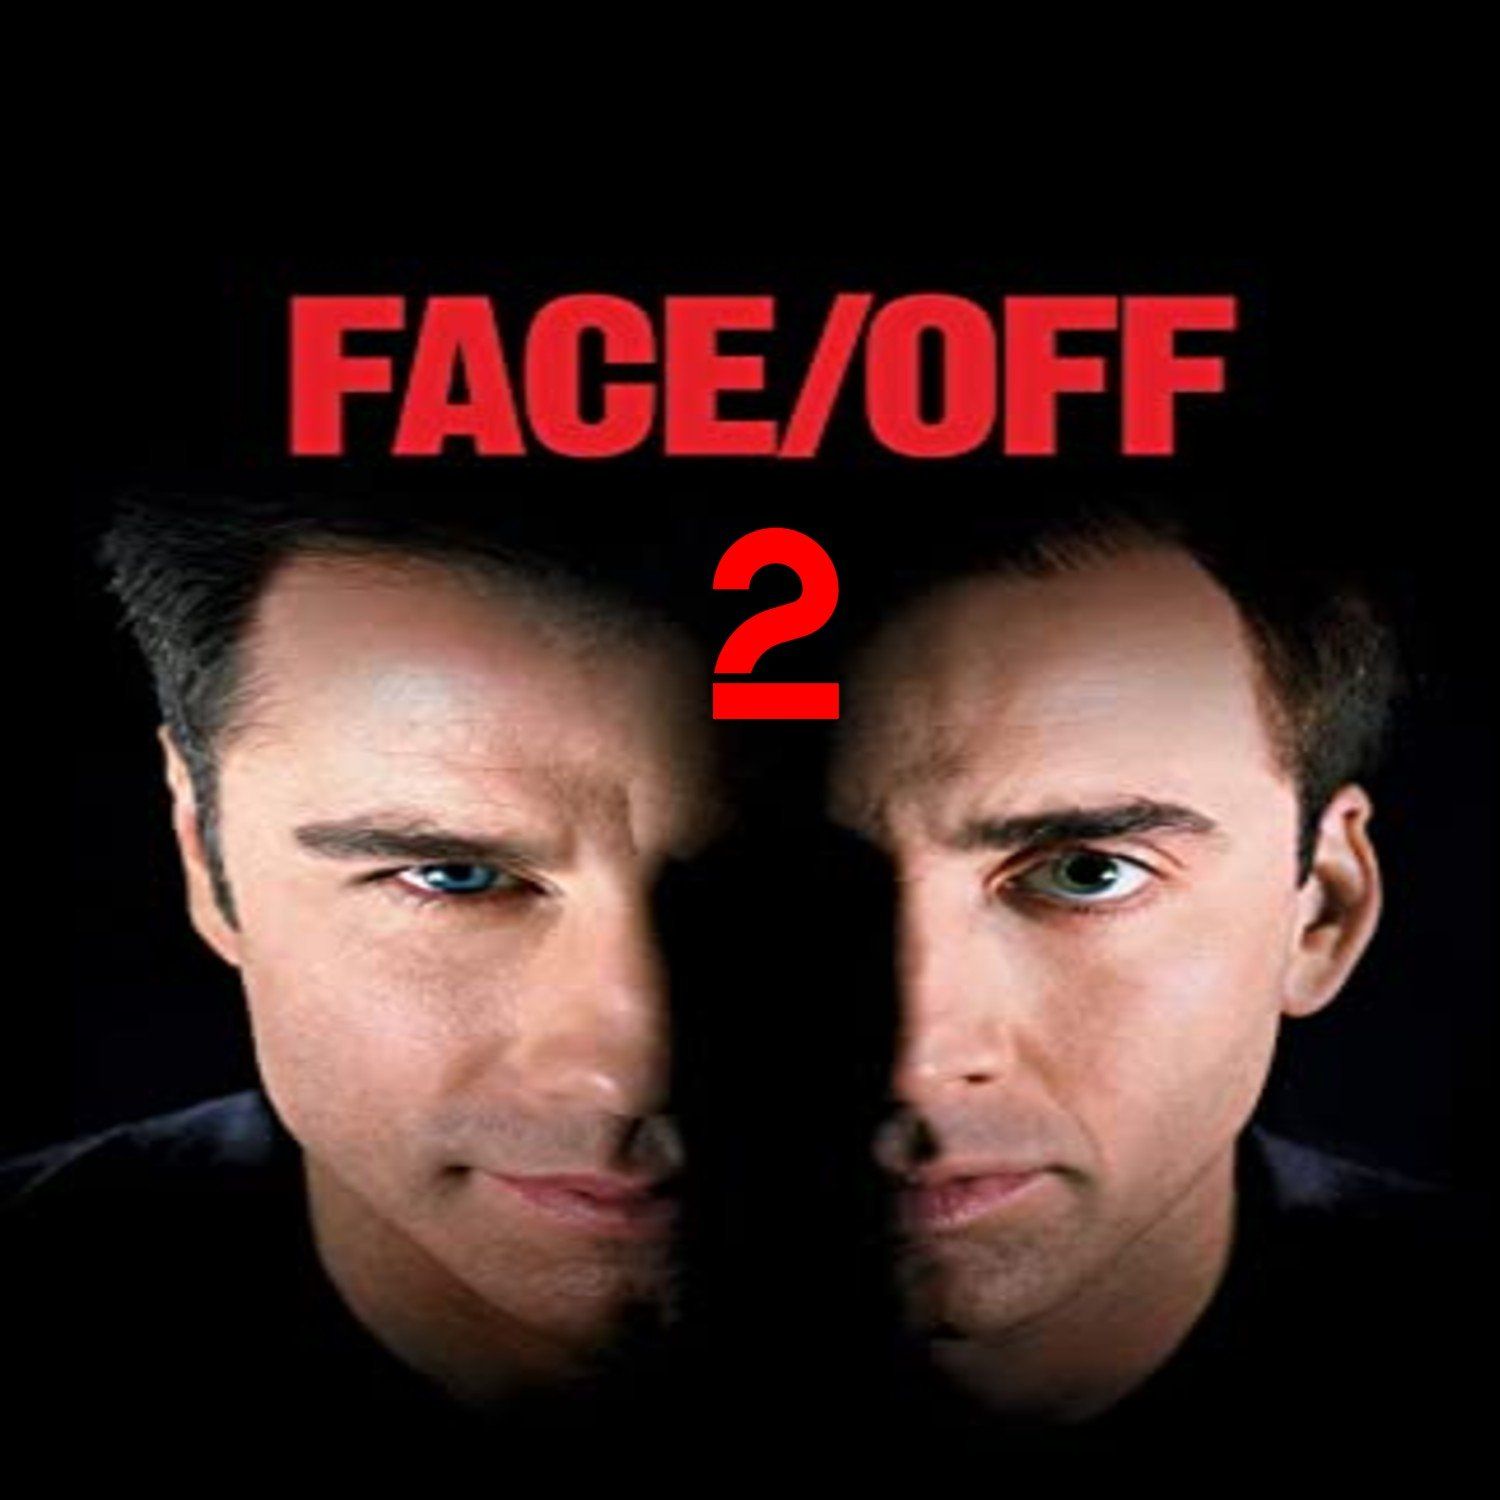 Face/Off 2